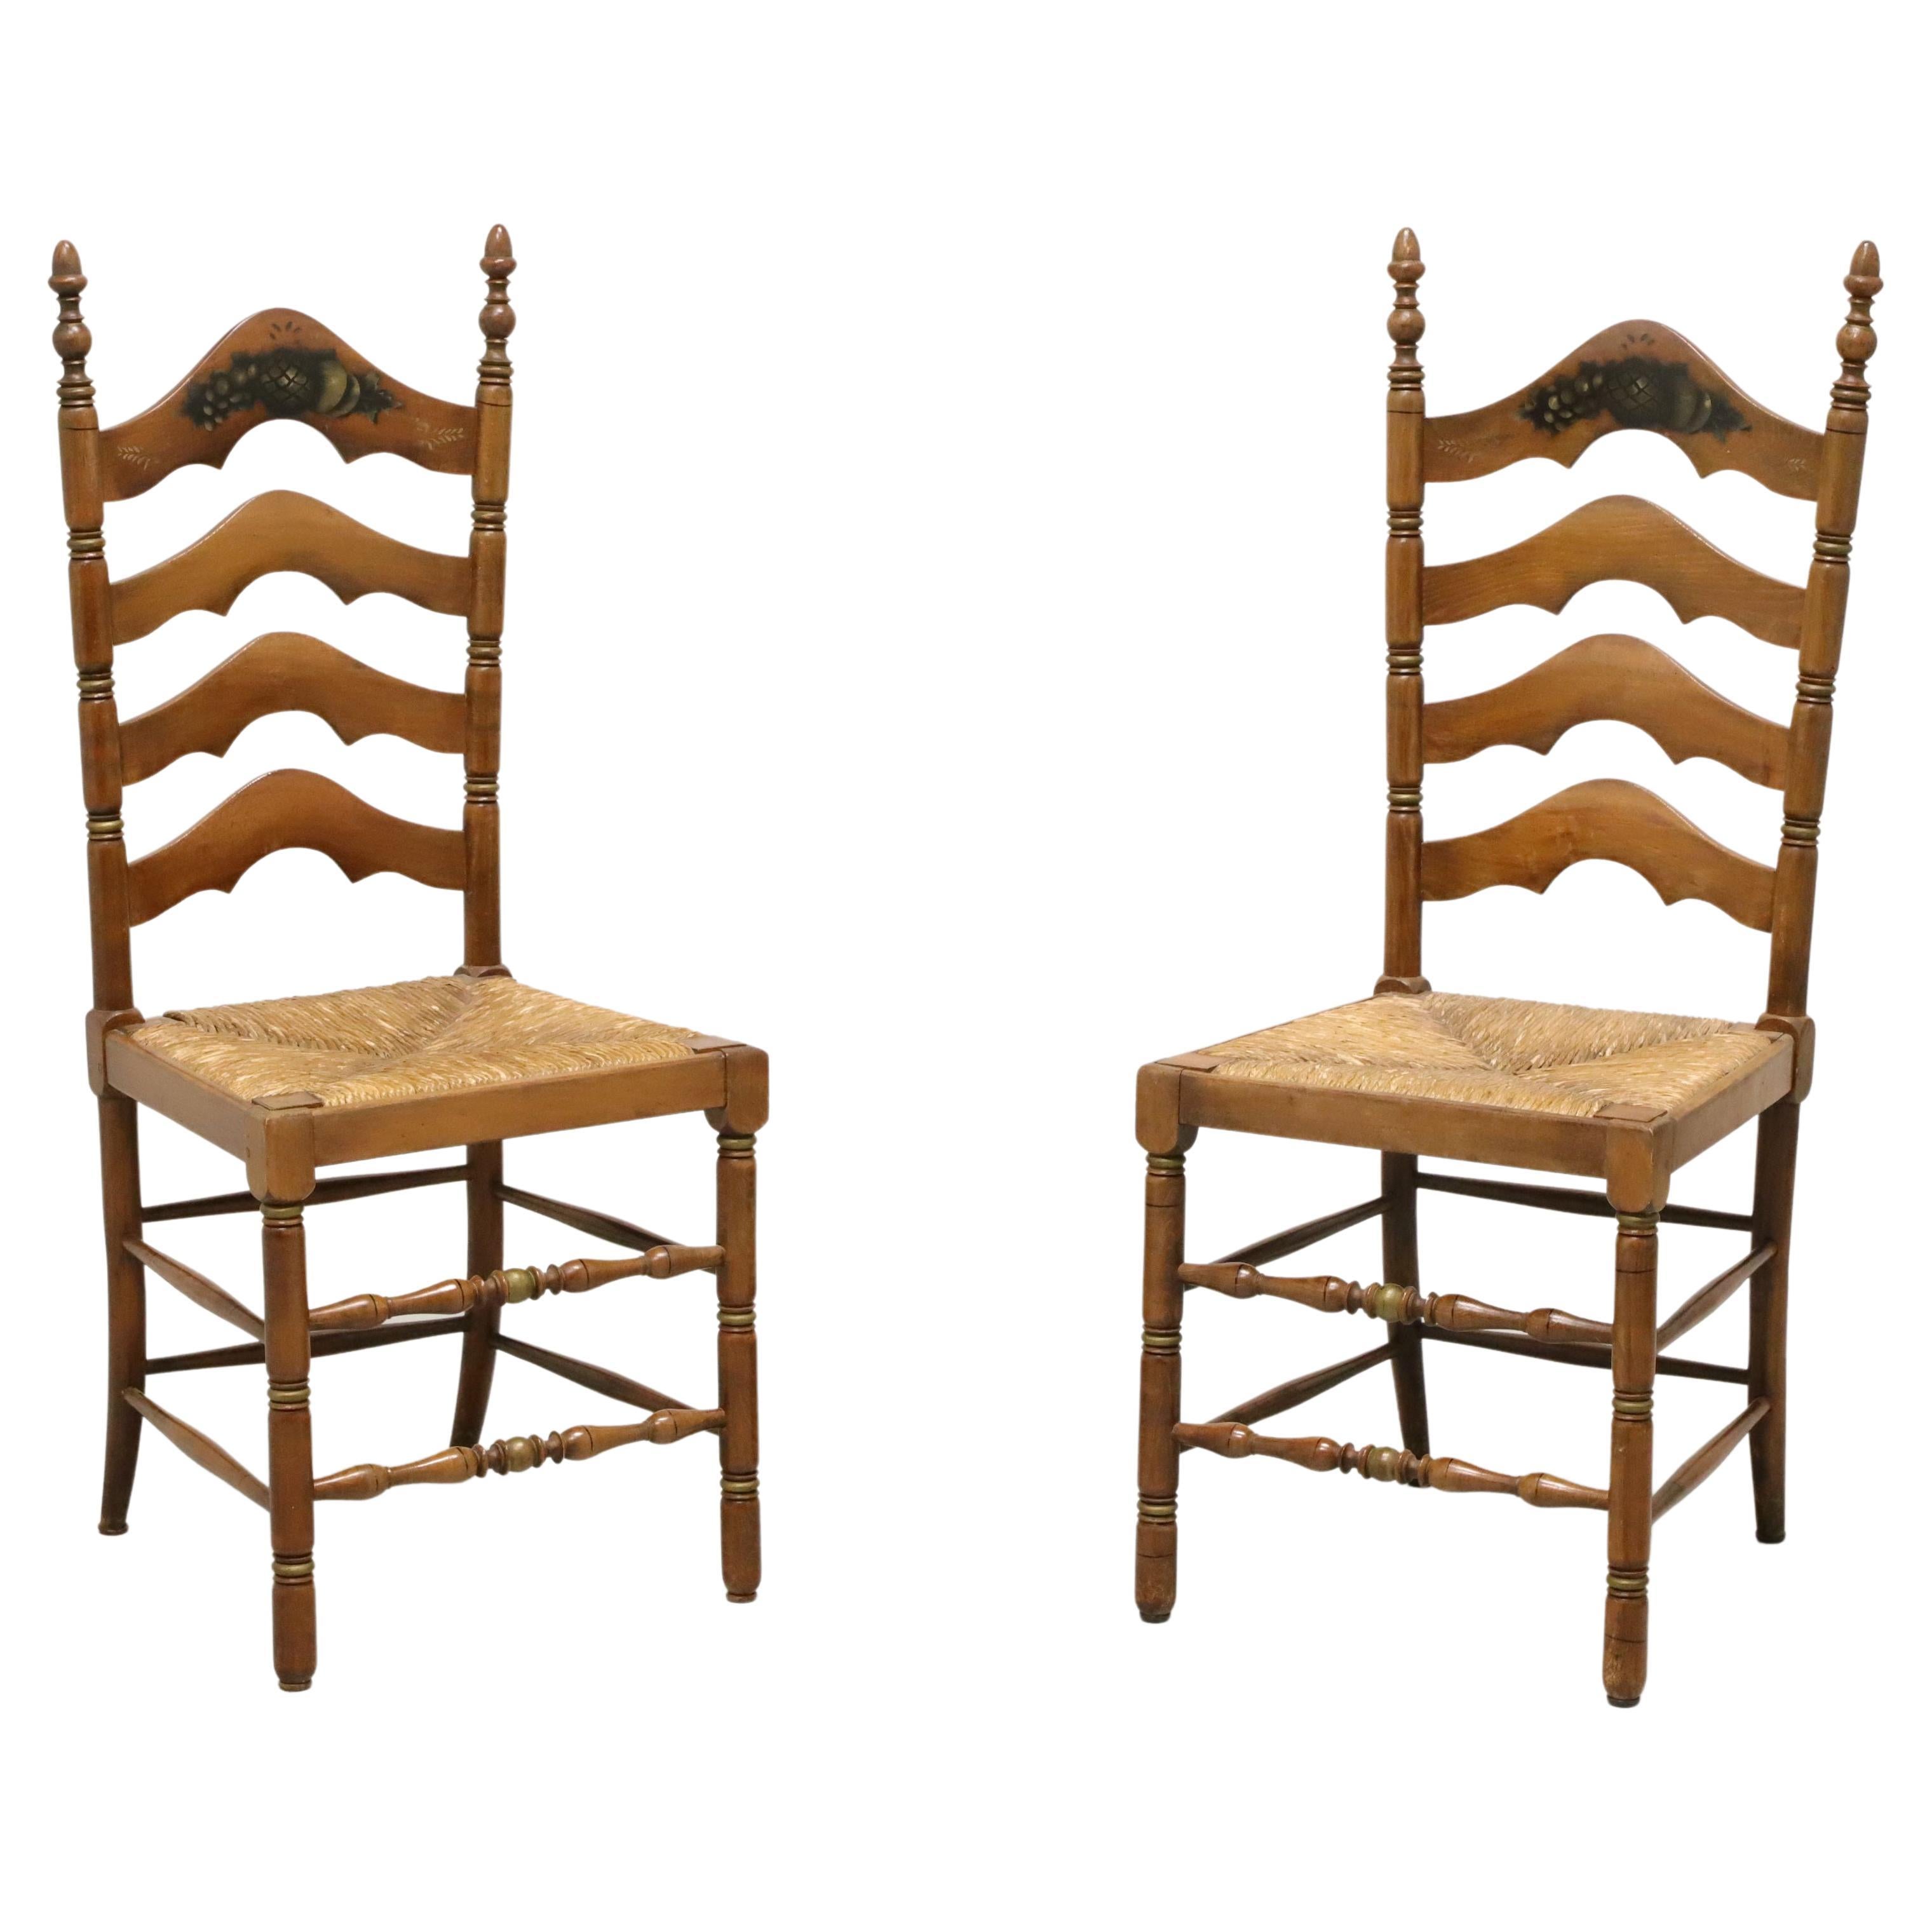 CAPE ANN CHAIRS Maple Ladder Back Dining Side Chairs with Rush Seats - Pair A